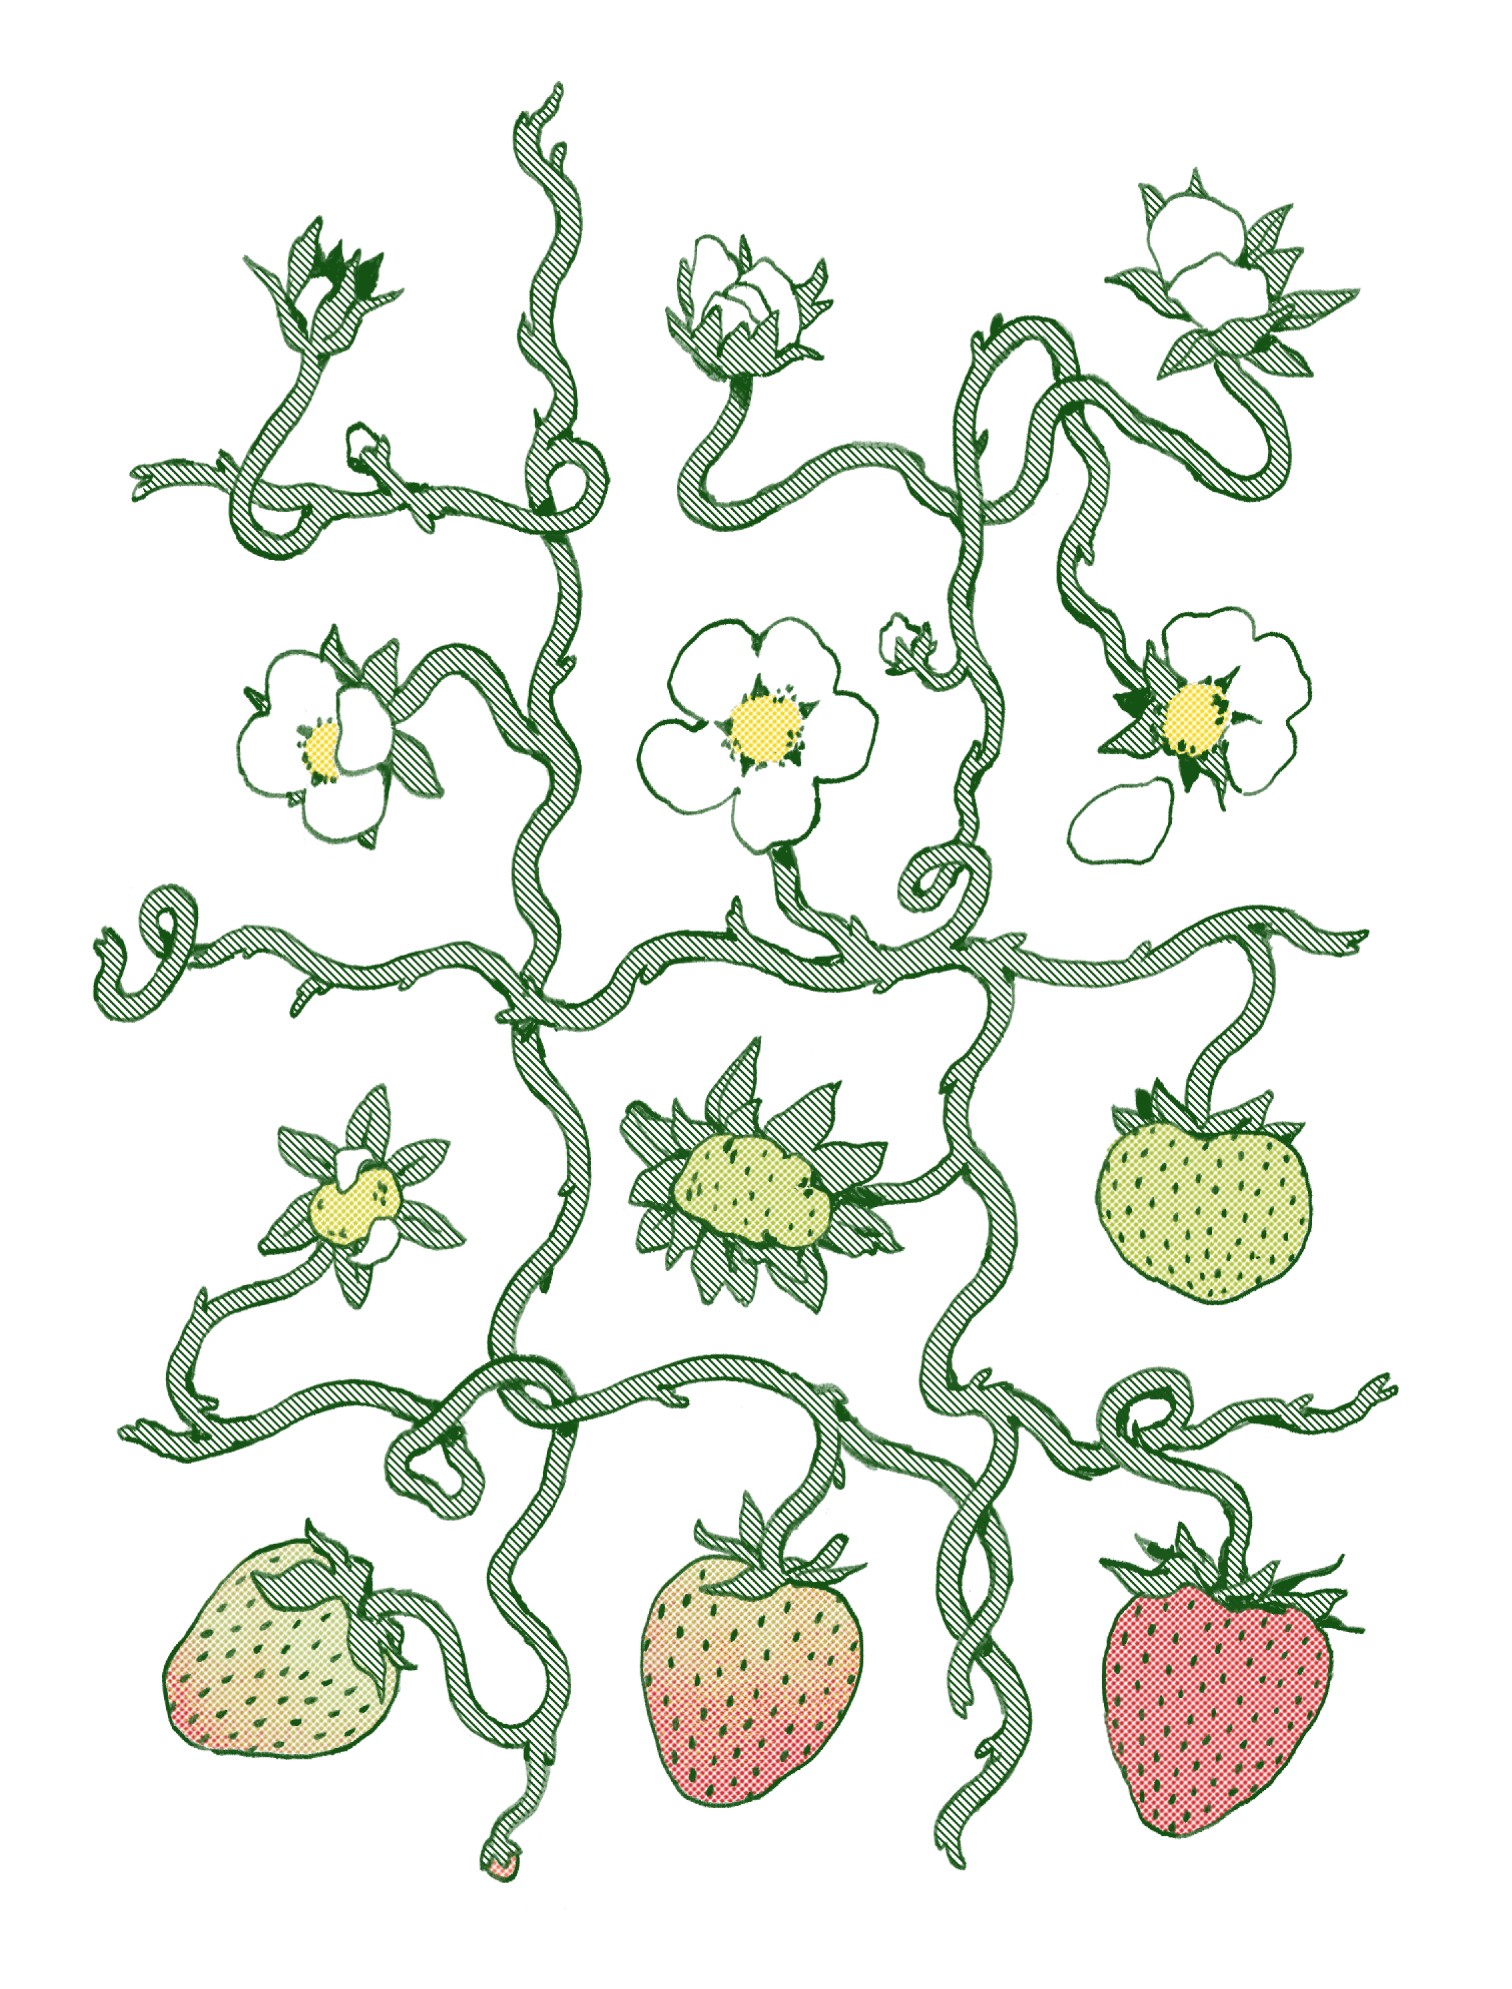 A lattice grid composed of vines displays each stage of the strawberry's growth. It transforms from bud to blossoming flower. As the petals wilt the green berry ripens to red.